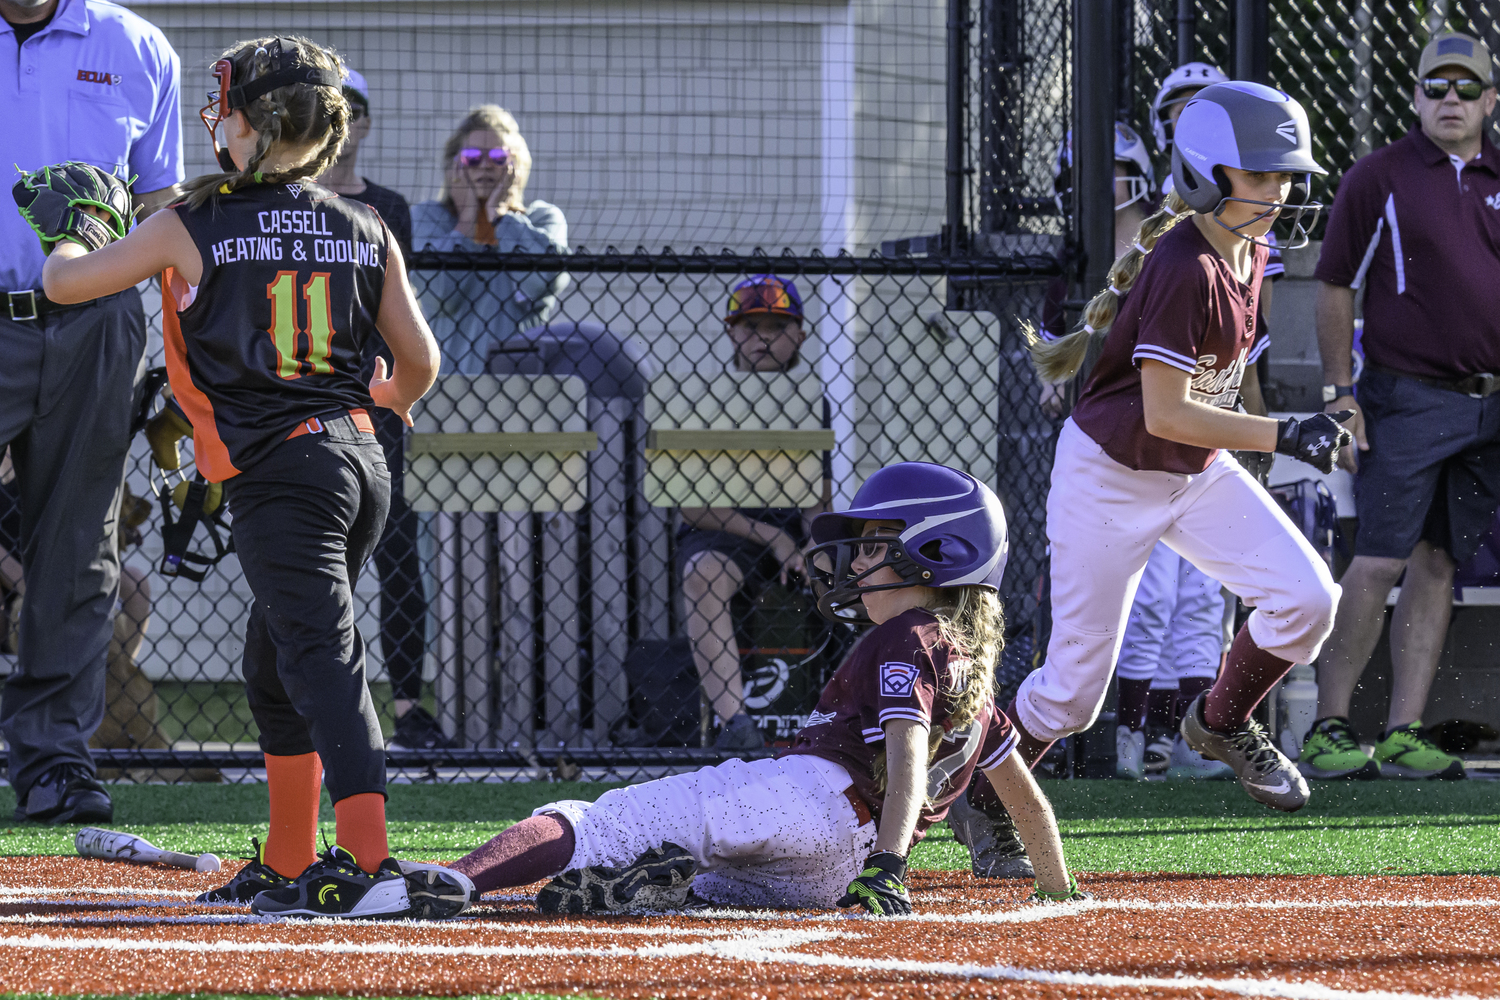 Charlotte Vickers slides safely into home plate as Avery Dalene heads to first. MARIANNE BARNETT